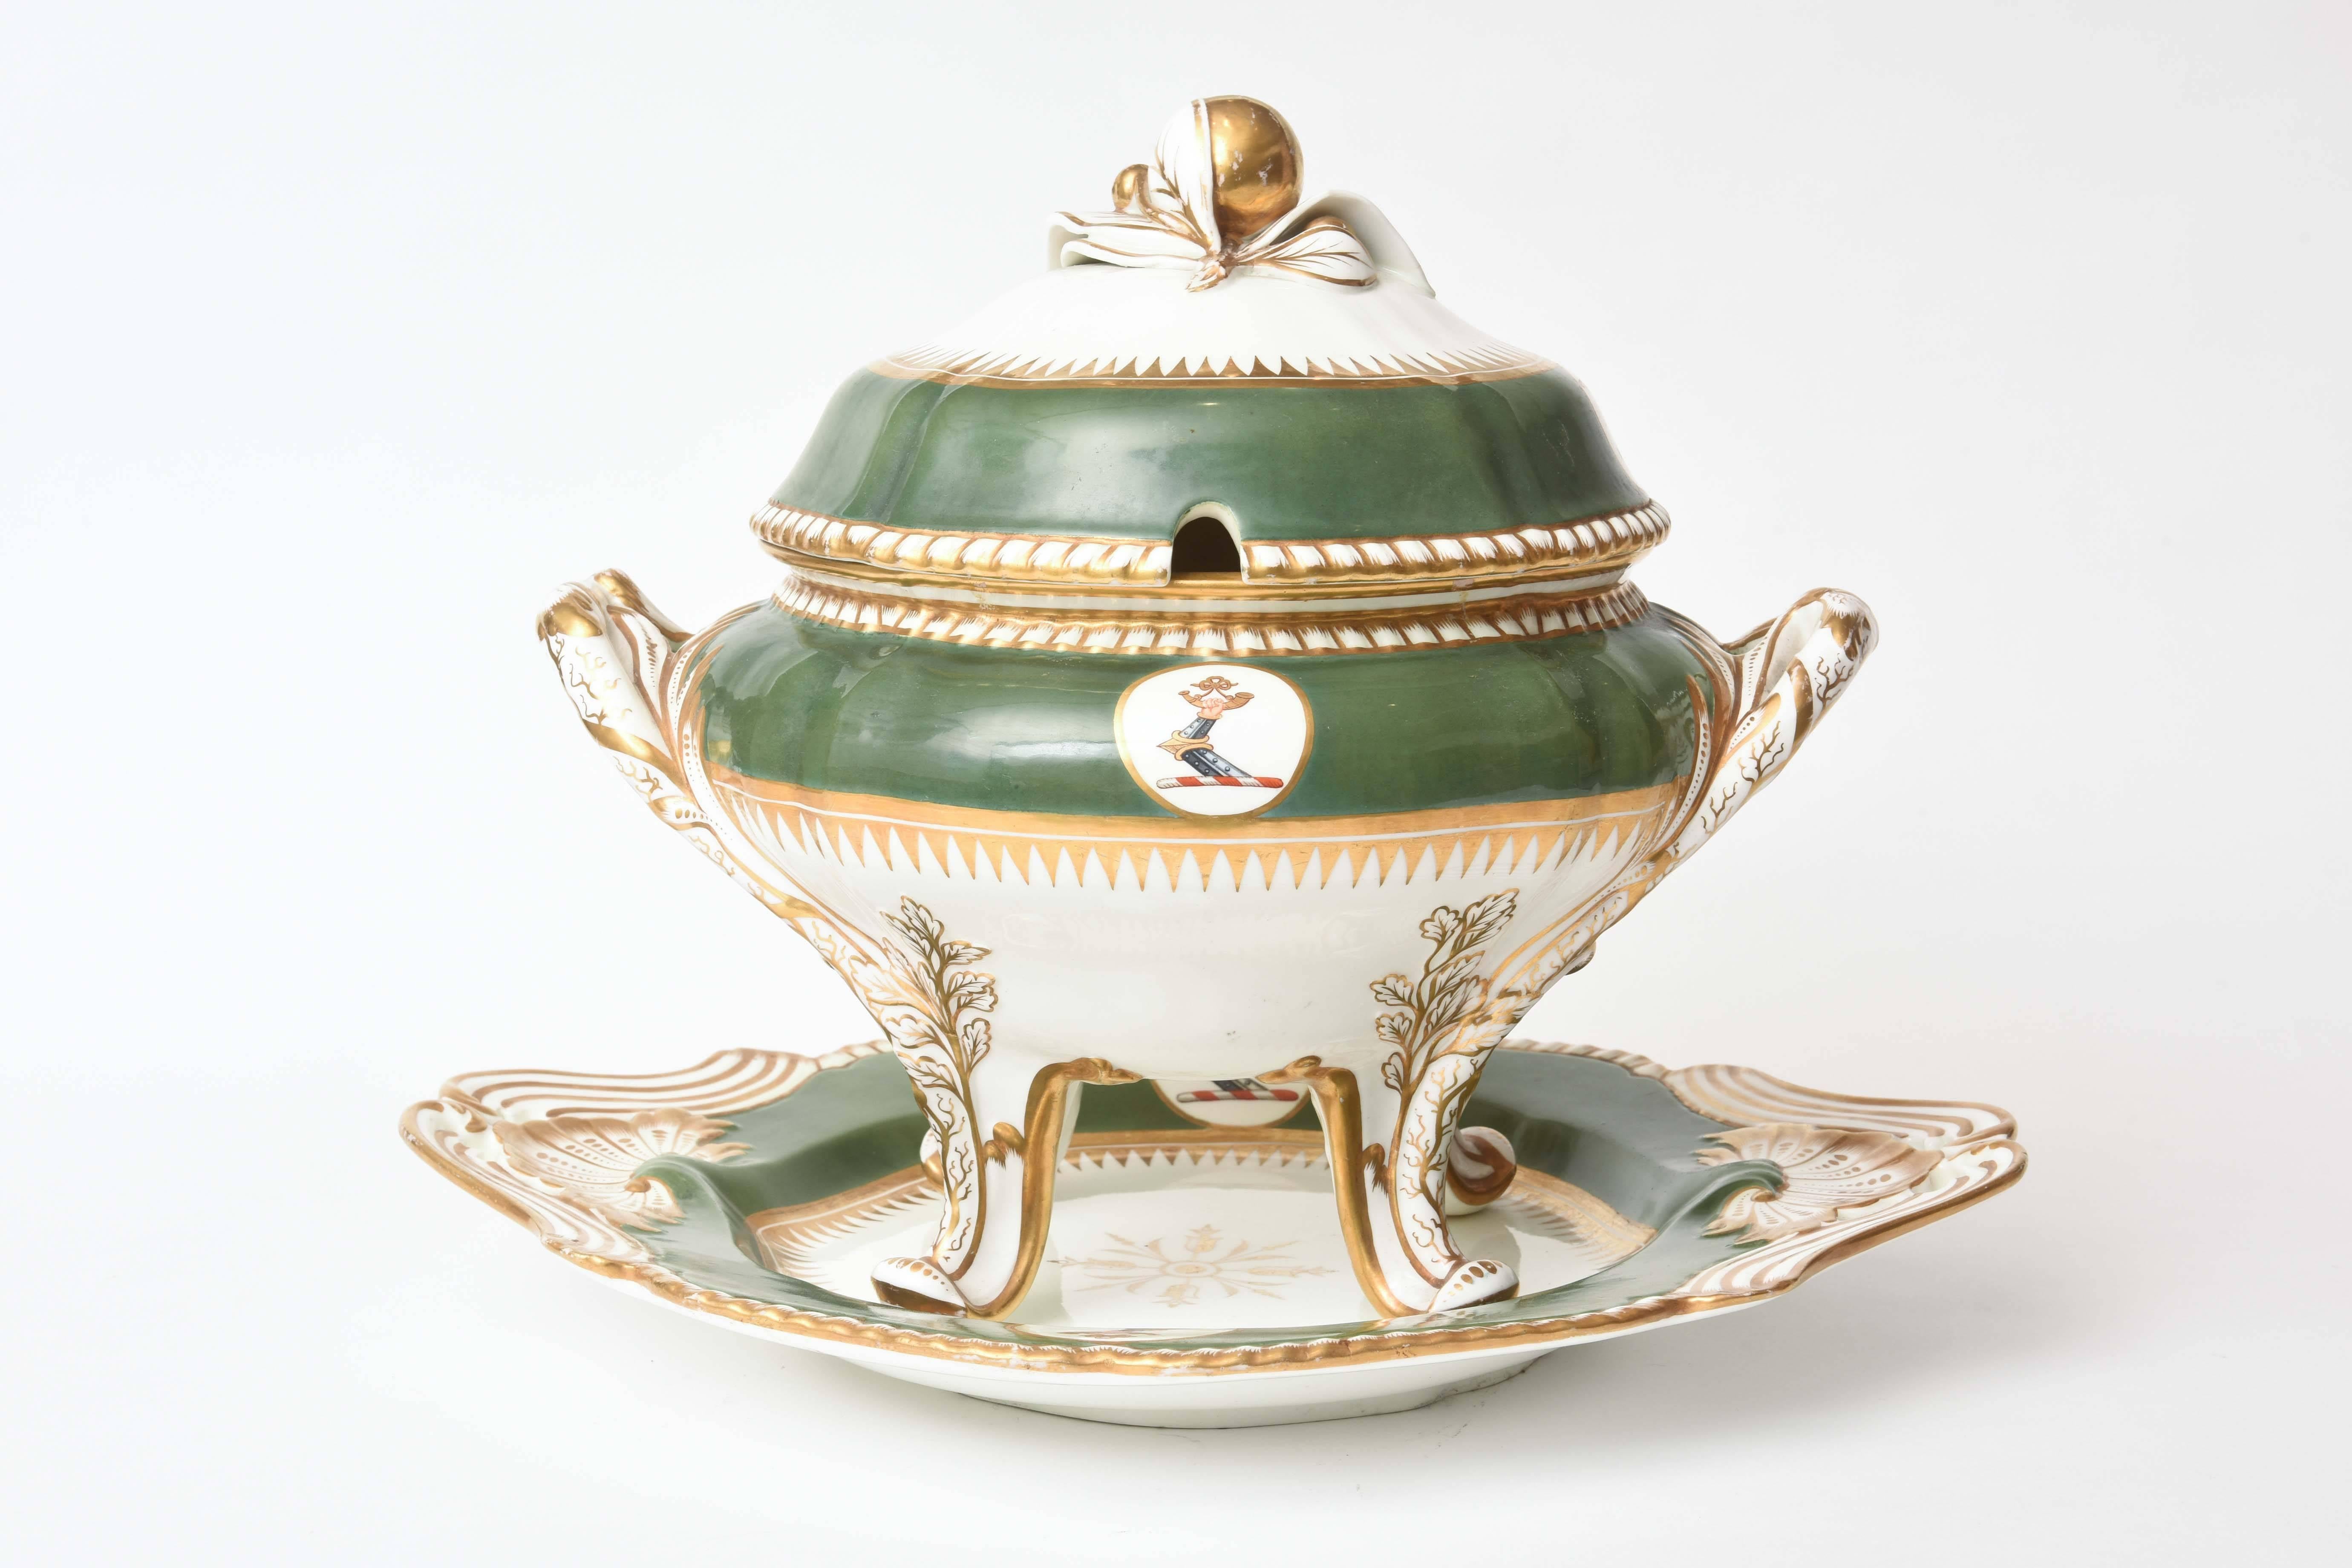 An impressive piece by the storied English porcelain firm of Spode. Hall marked and dated to the mid-19th century. Delightful raised pedestal feet, elaborate finial and detailed gadrooned edge will make this three-piece soup tureen the highlight of